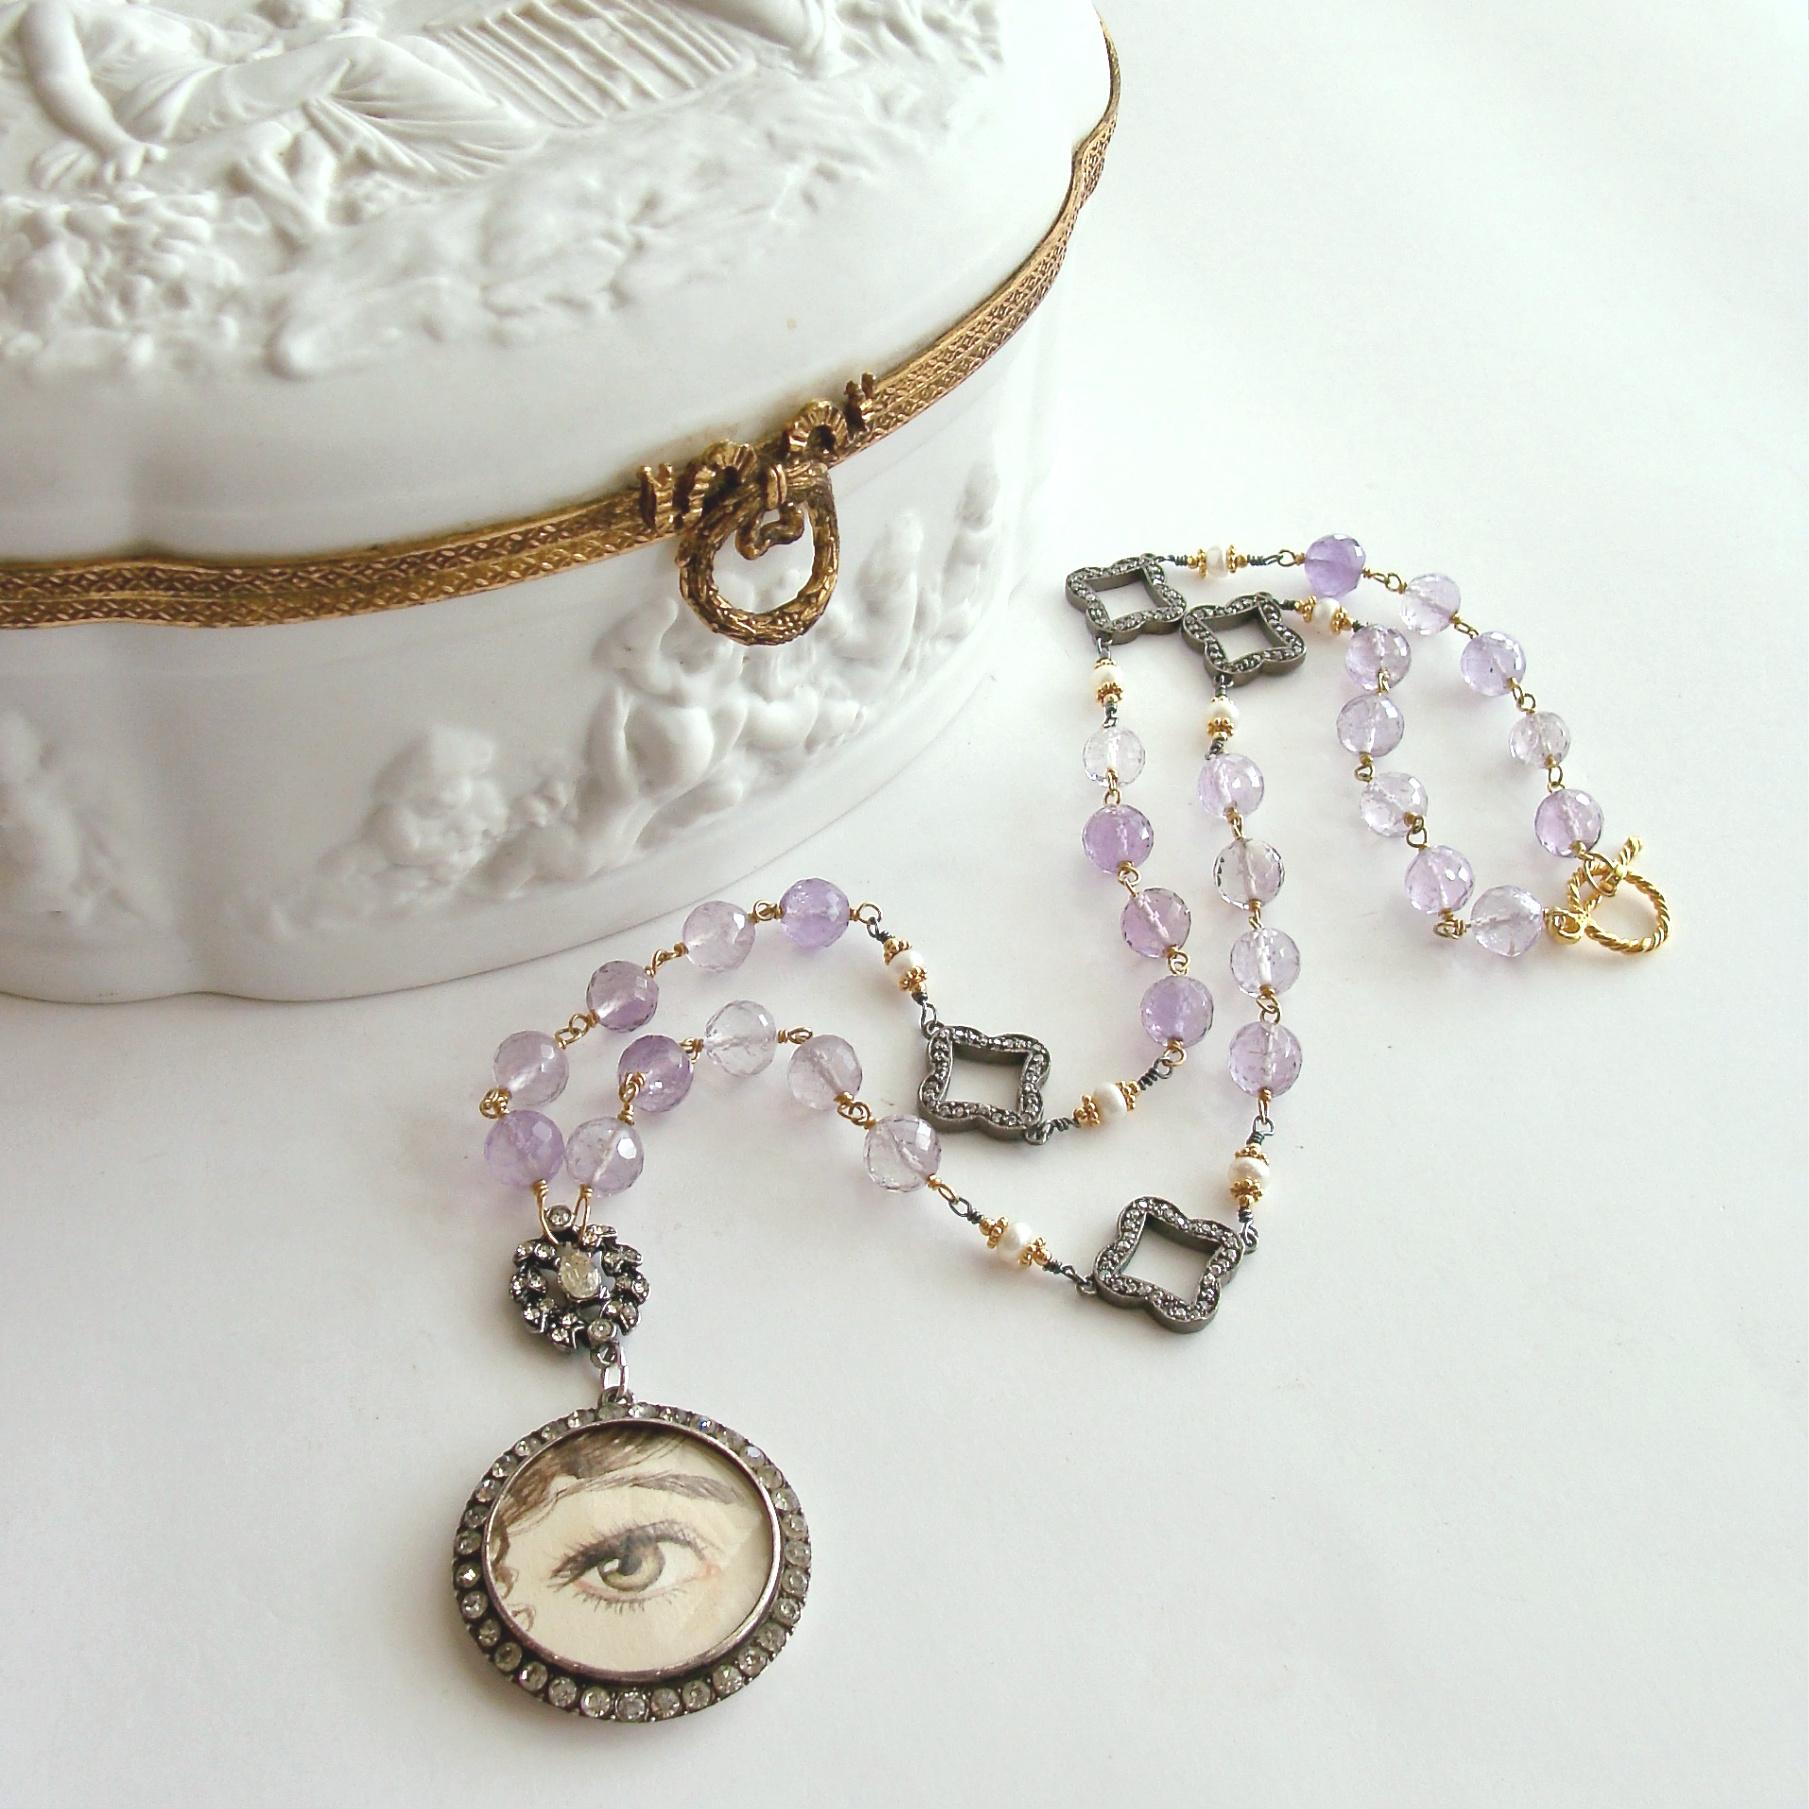 Bead Lover’s Eye Pink Amethyst Button Pearls Silver Paste Quatrefoils Necklace